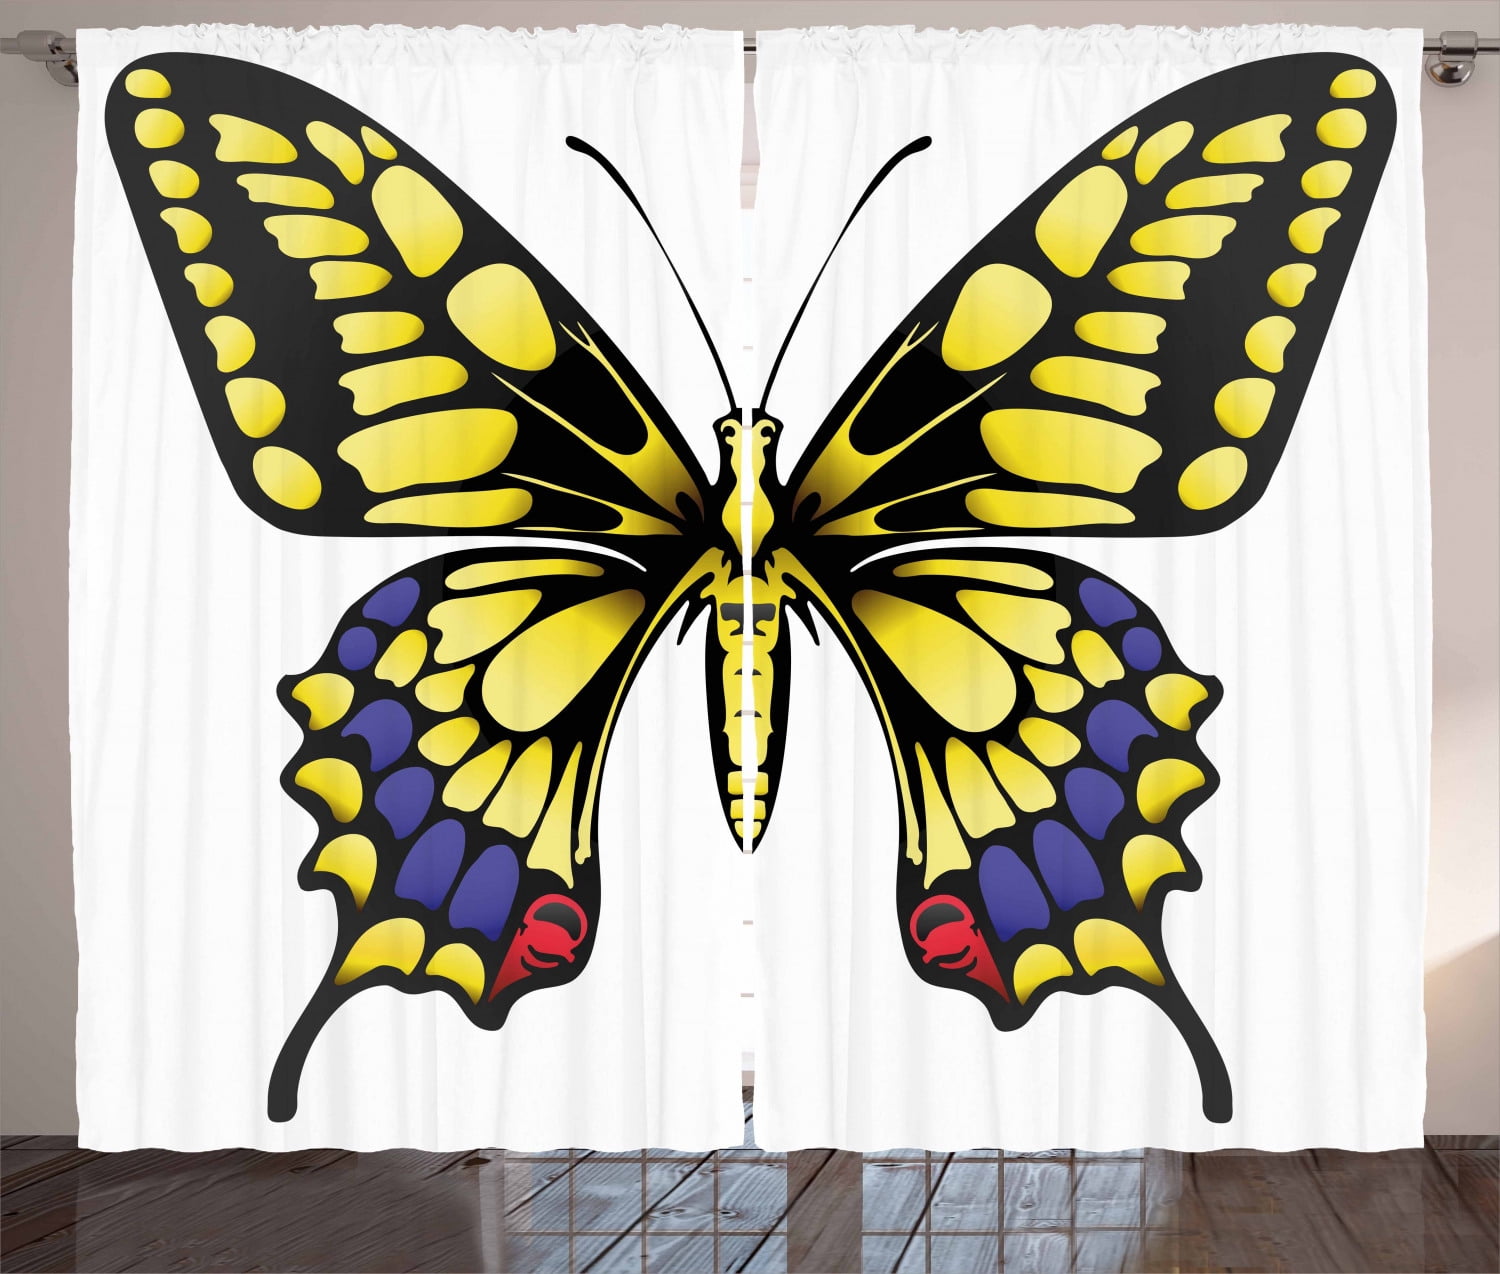 Swallowtail Butterfly Curtains 2 Panel Set Decor 5 Sizes Available Window Drapes 